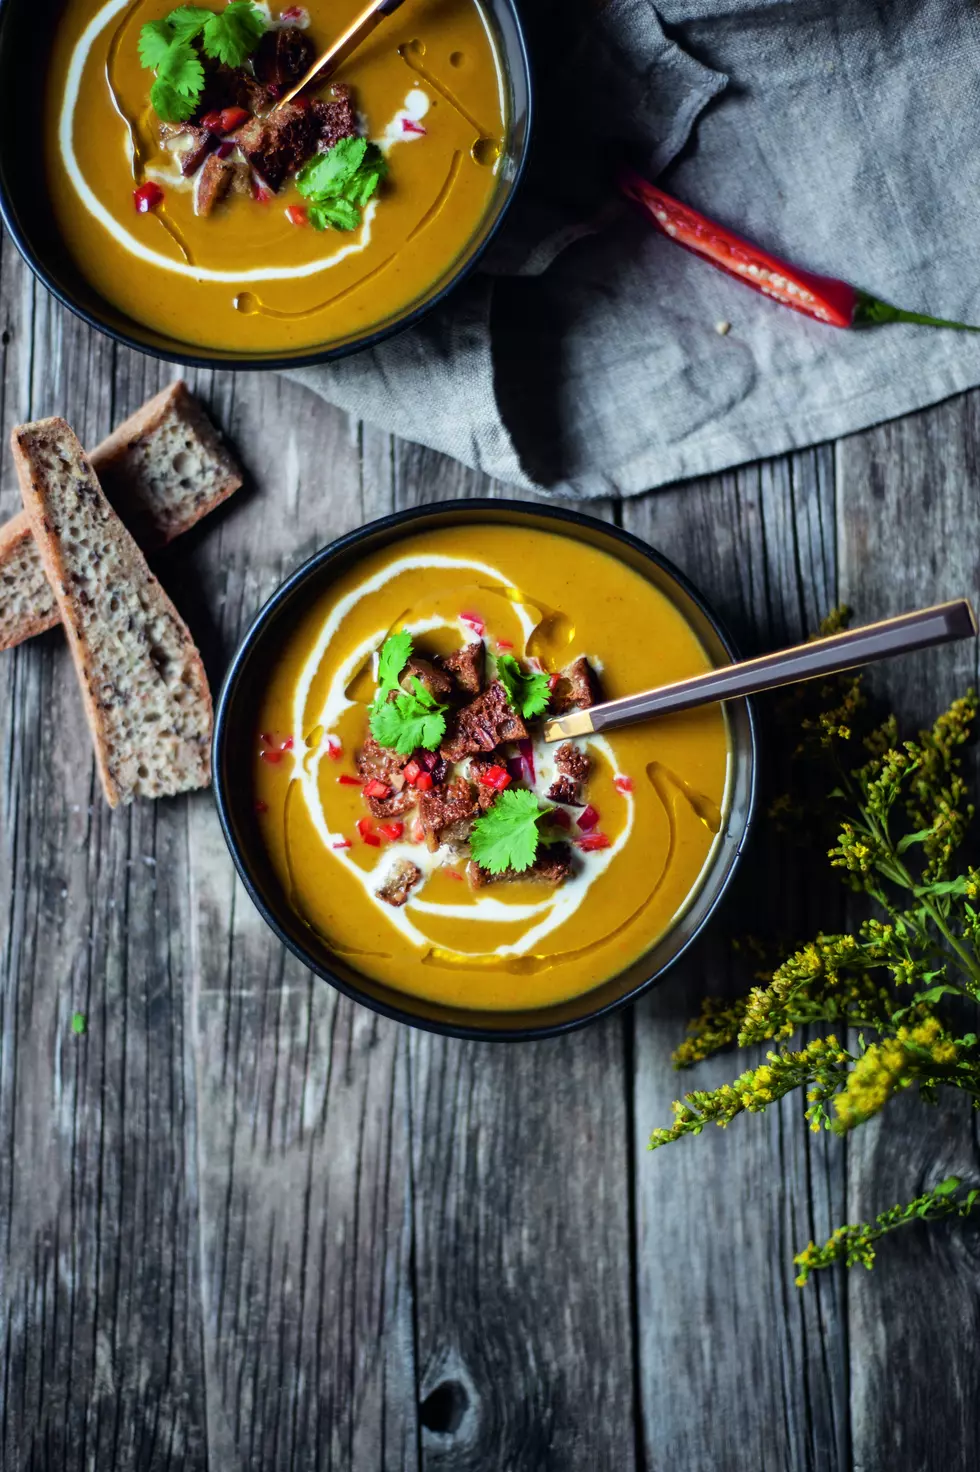 Autumn in a Bowl: The Best Coconut and Pumpkin Soup